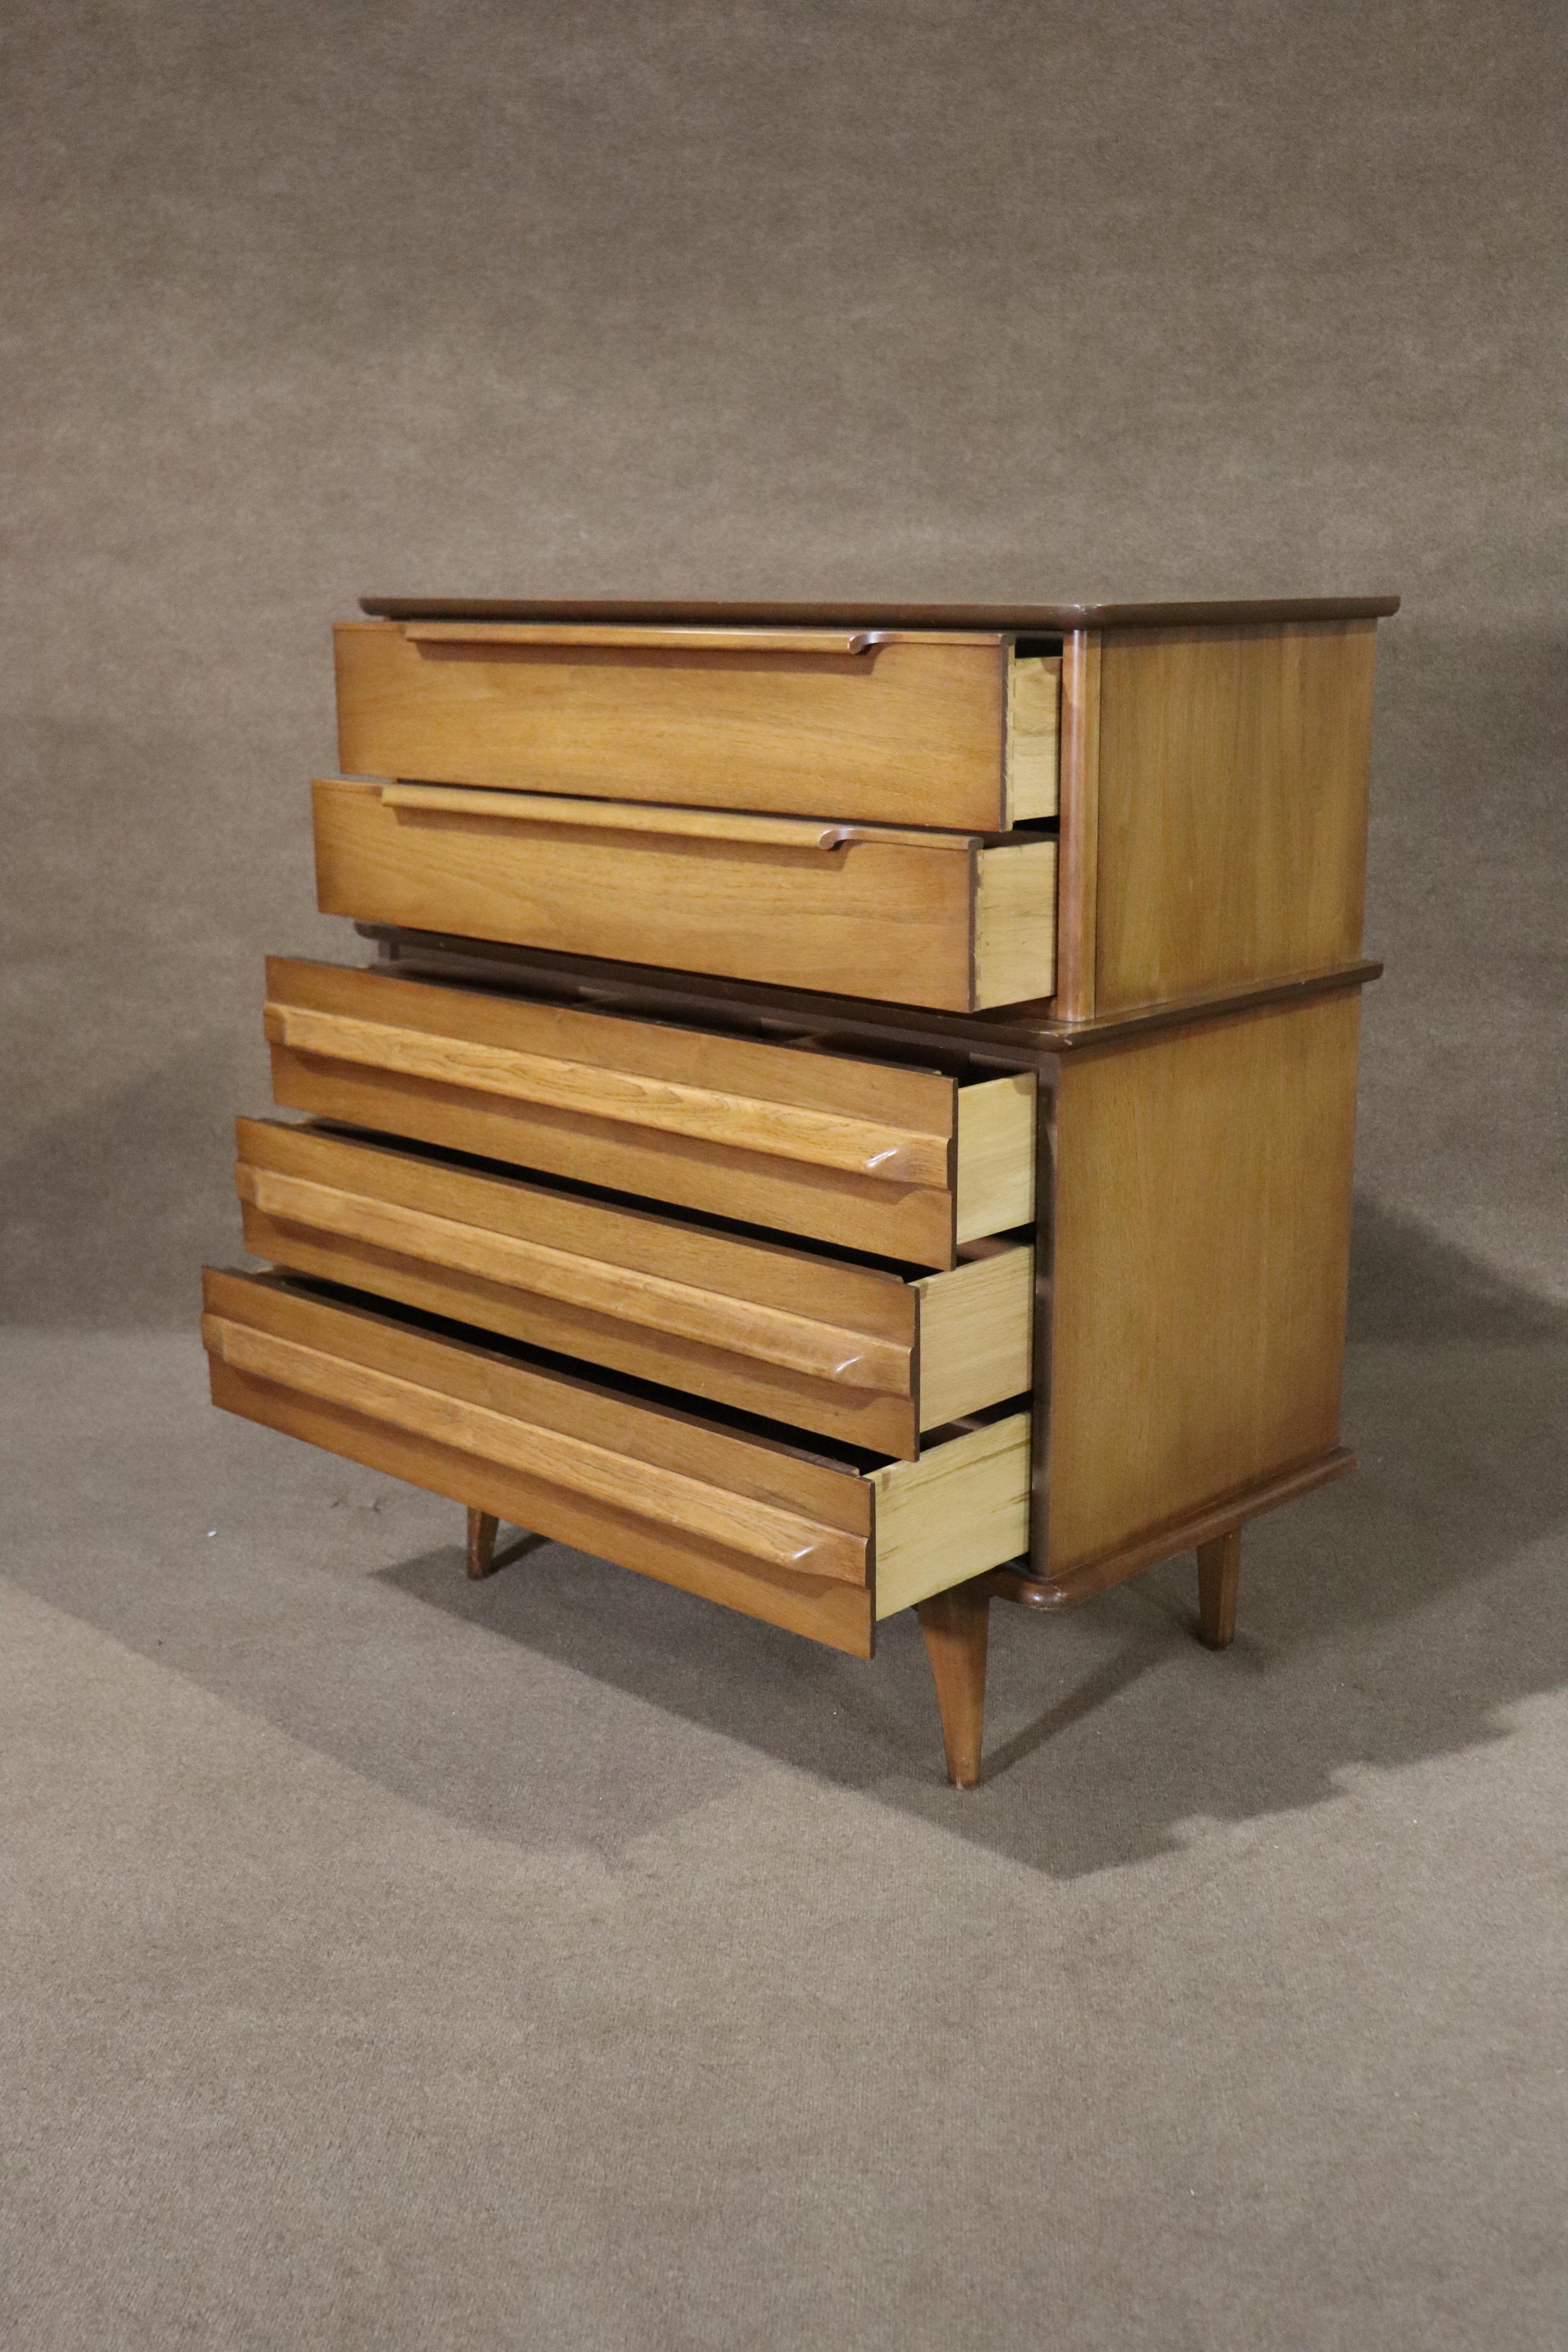 Mid-century modern hiboy dresser in walnut grain. Five wide drawers with sculpted handles.
Please confirm location NY or NJ